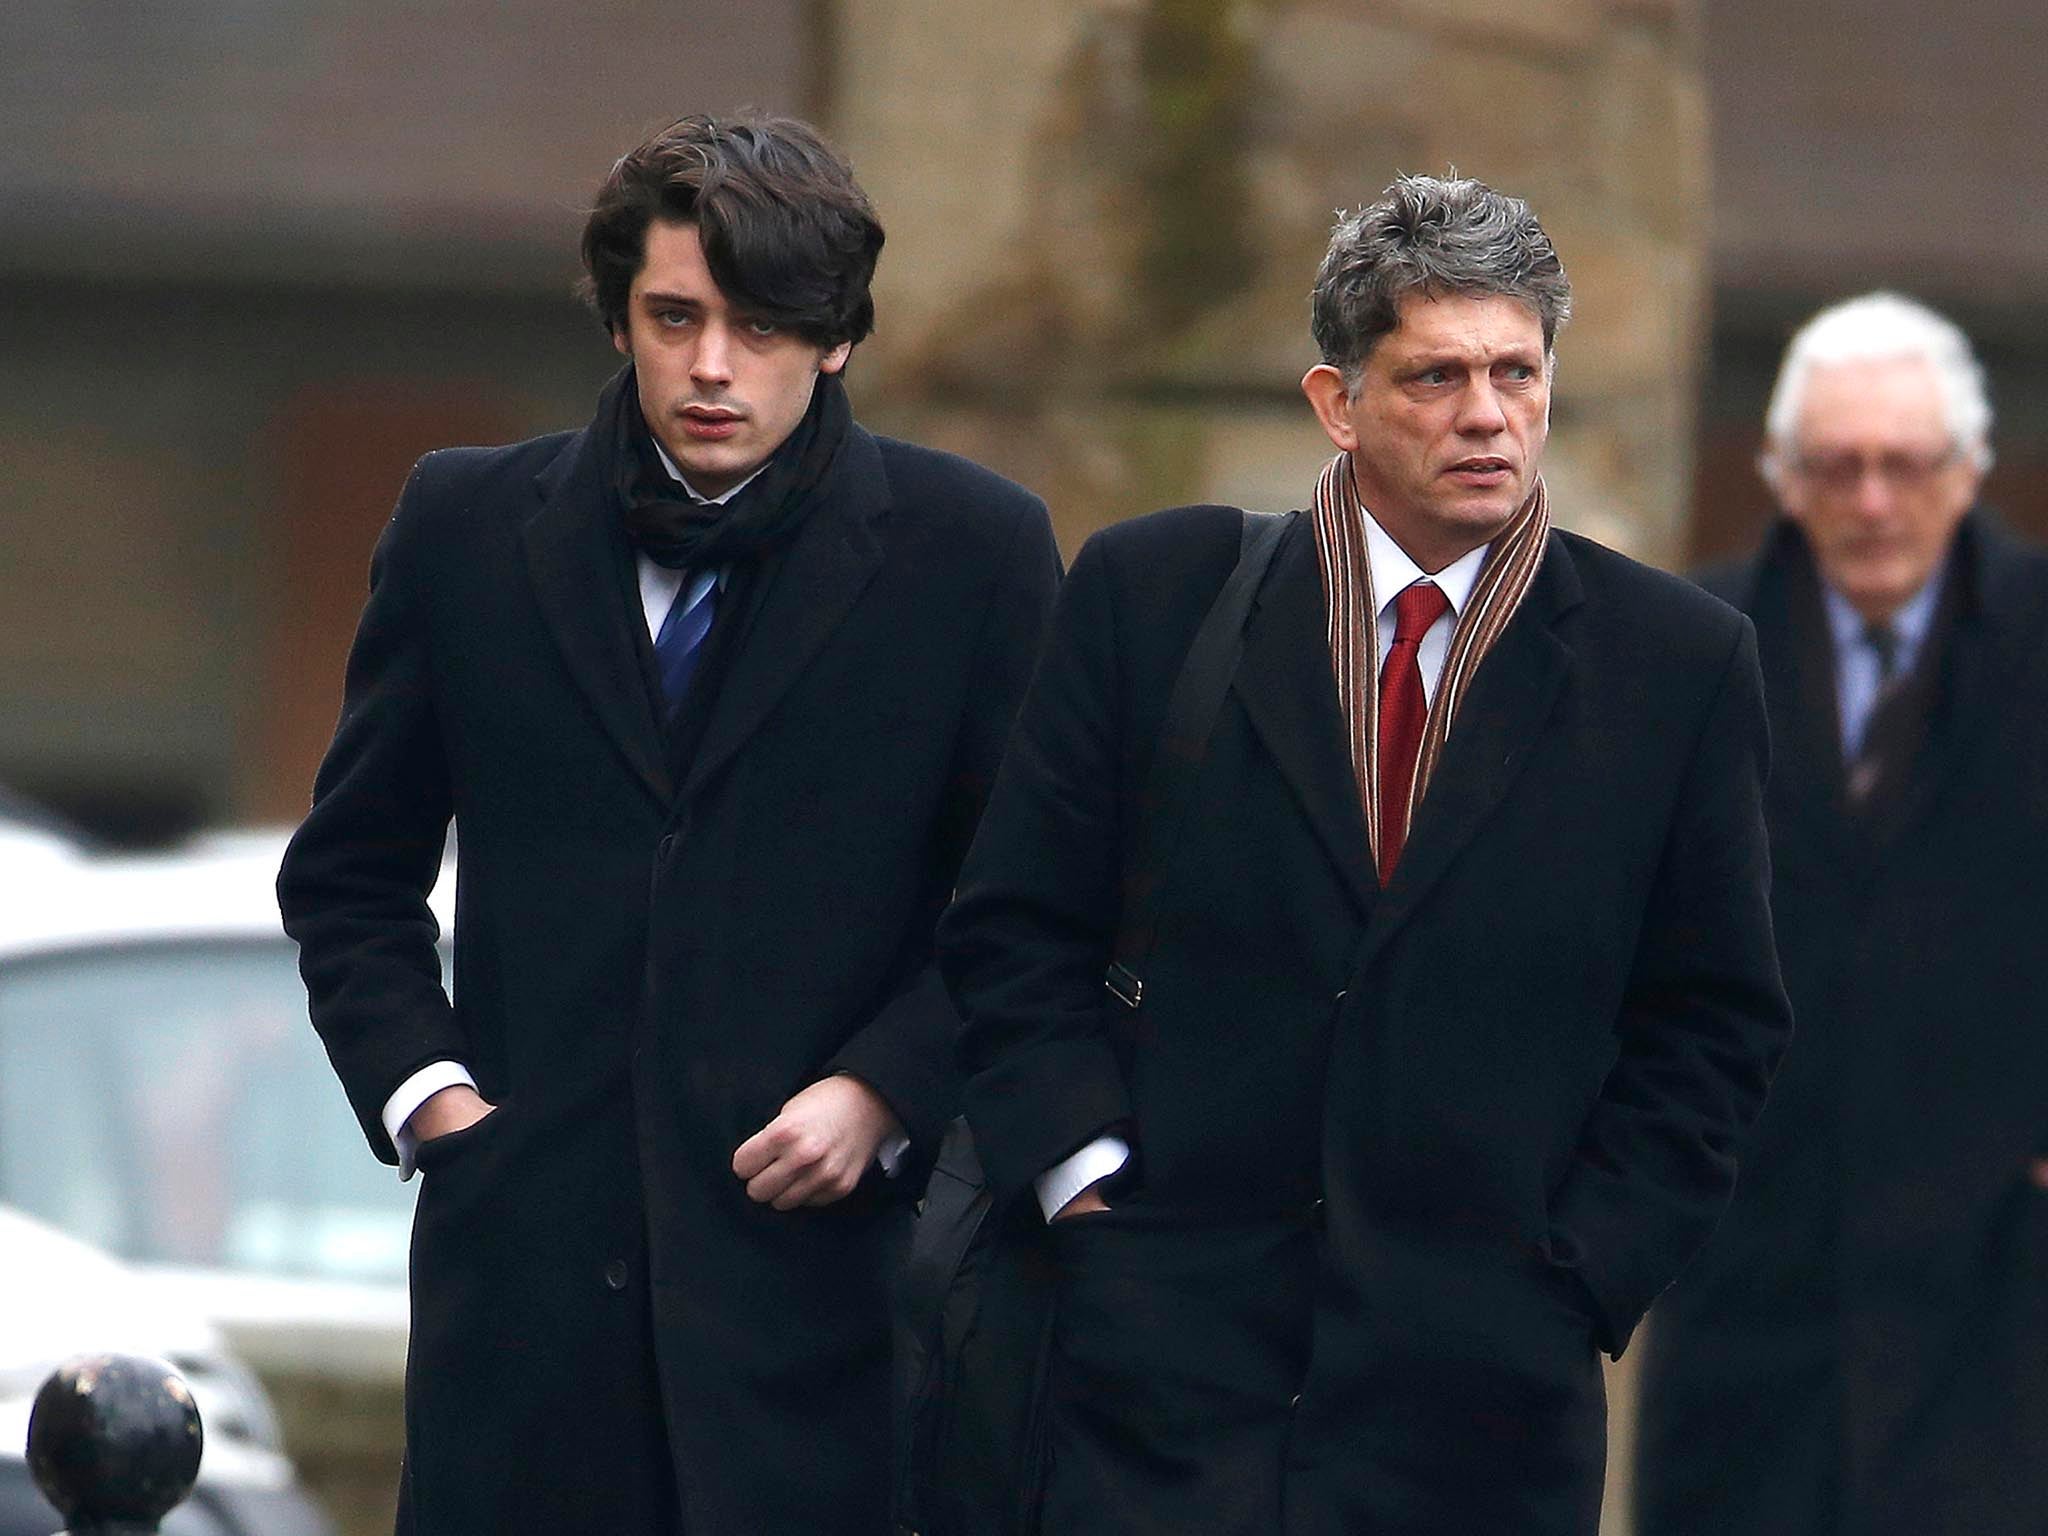 Louis Richardson, 21, (left) arrives back from lunch at Durham Crown Court, where he denies raping and sexually assaulting one woman and sexually assaulting another in 2014.